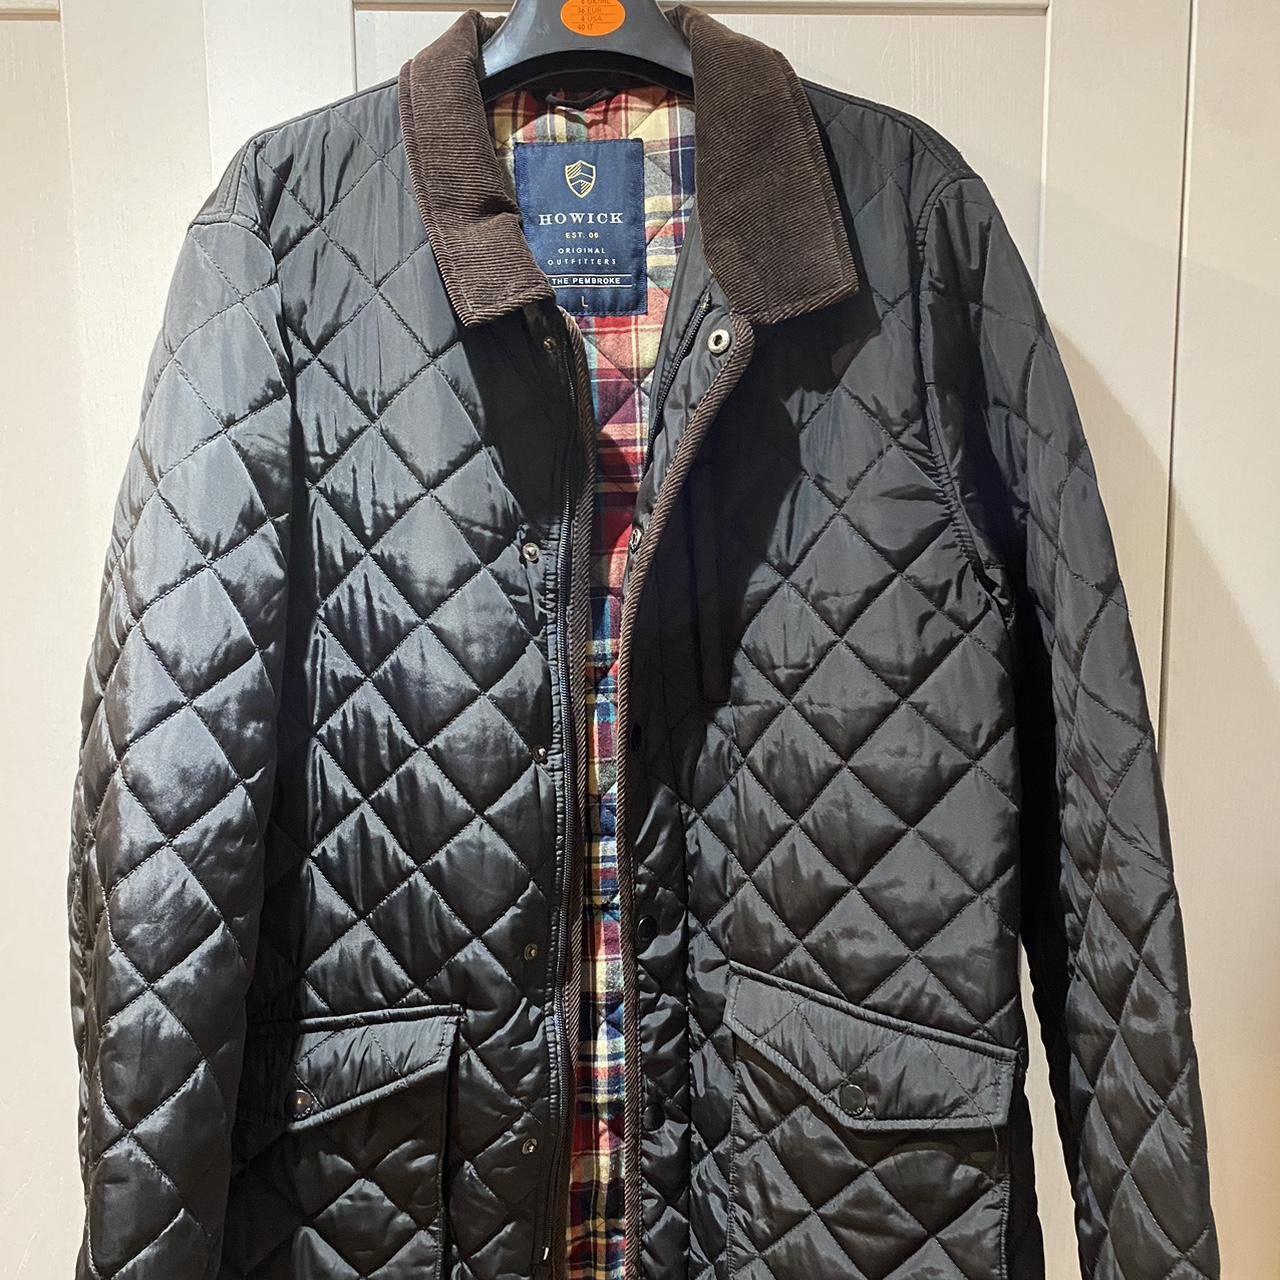 Howick ‘The Pembroke’ quilted jacket Large From... - Depop